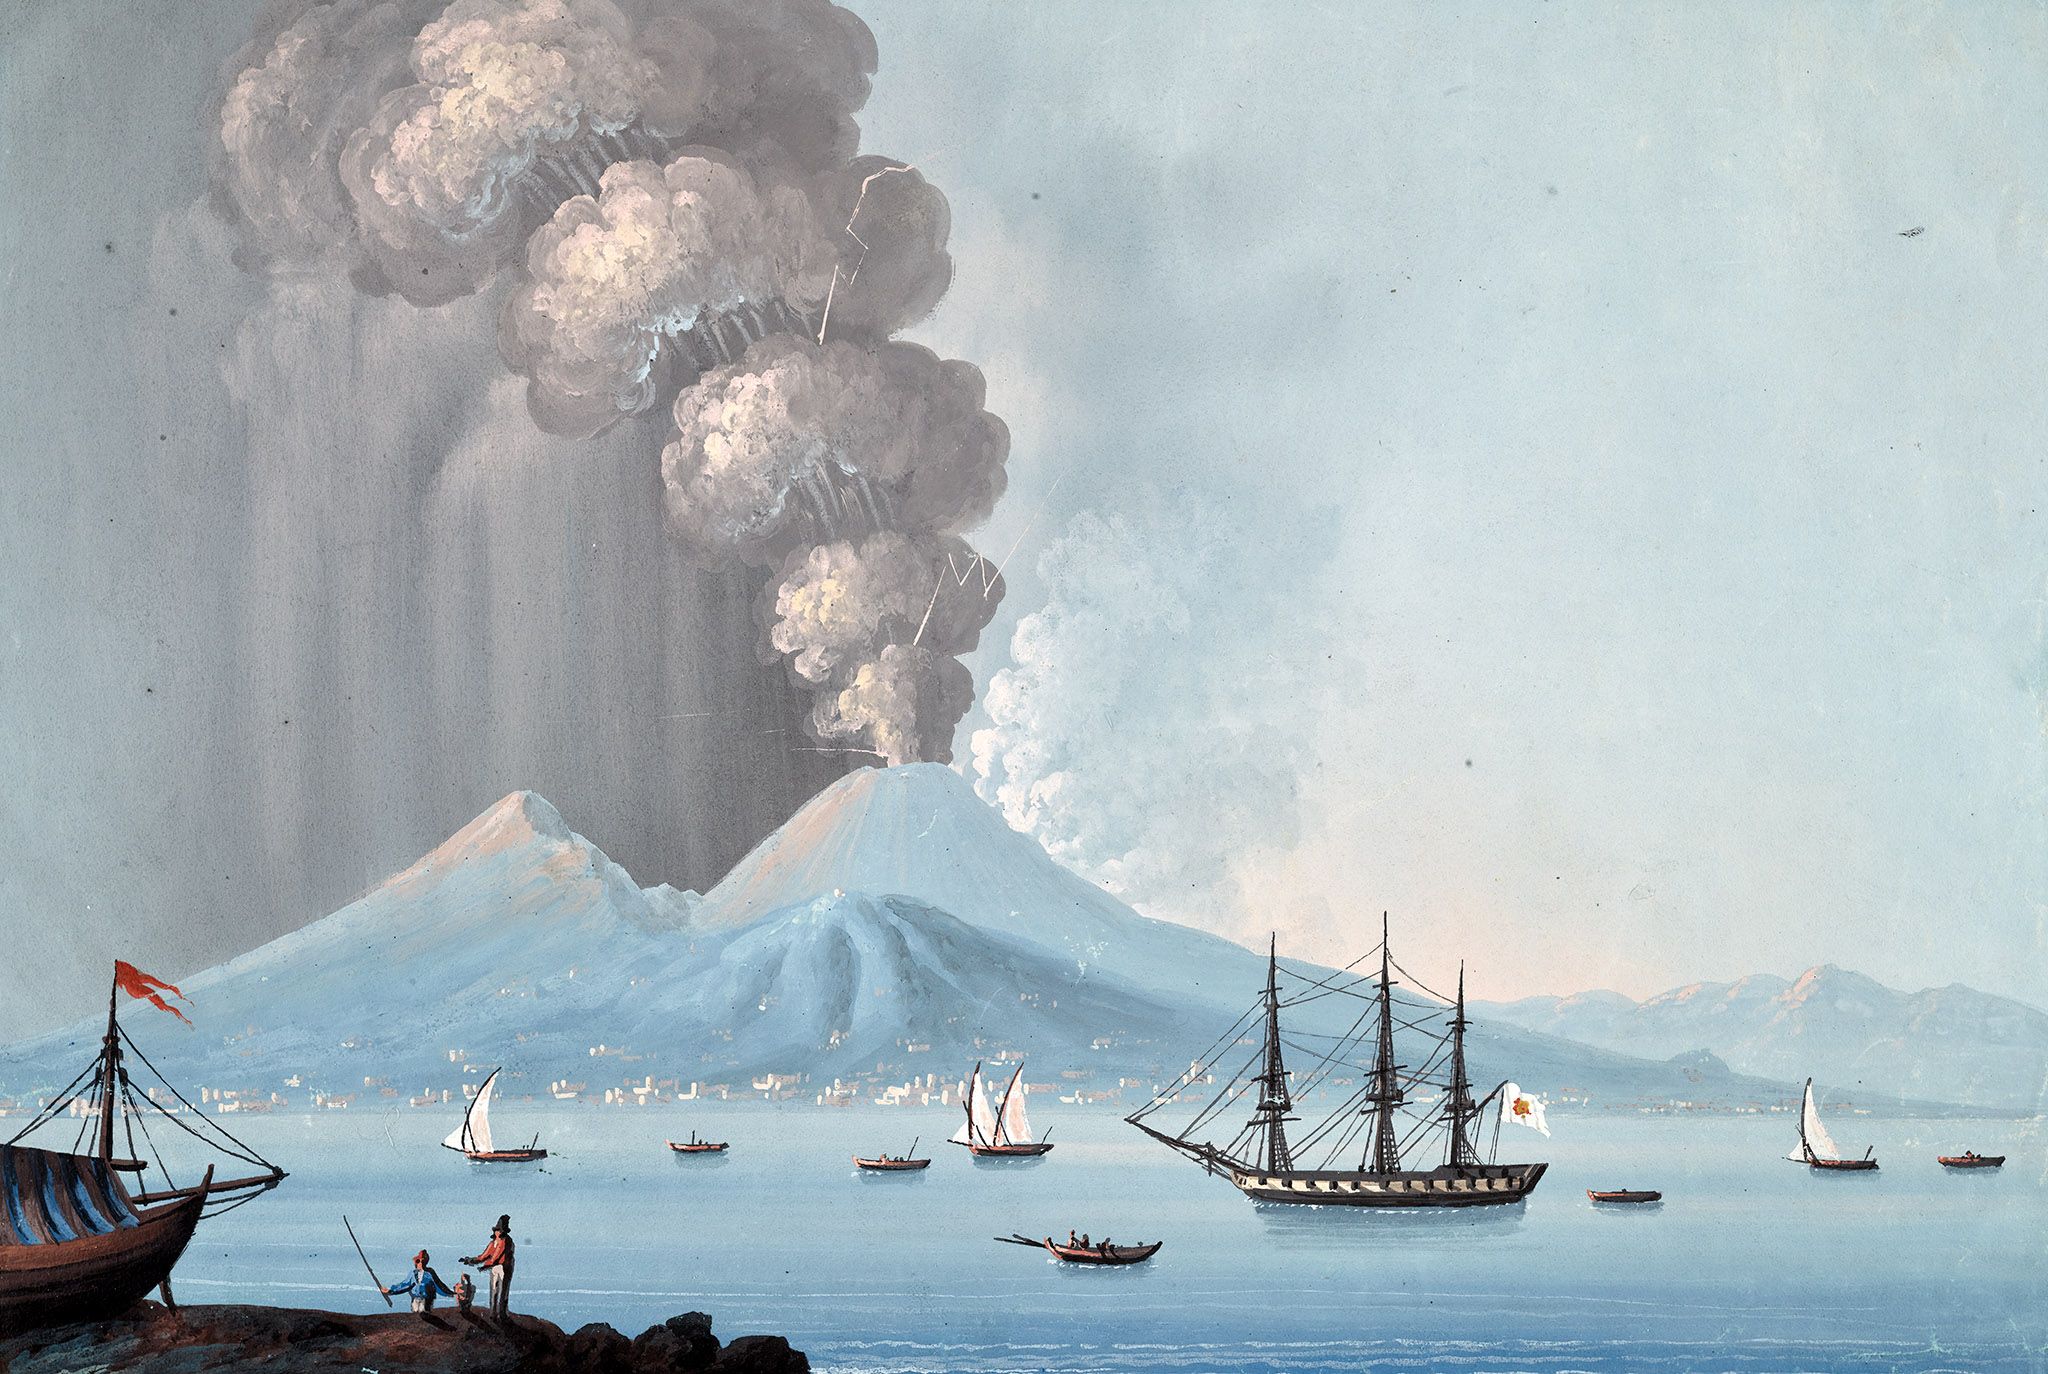 This tempera painting of the 1794 eruption of Mt. Vesuvius in Italy gives you some idea of what a volcano’s eruption column and the ensuing ash fallout look like.